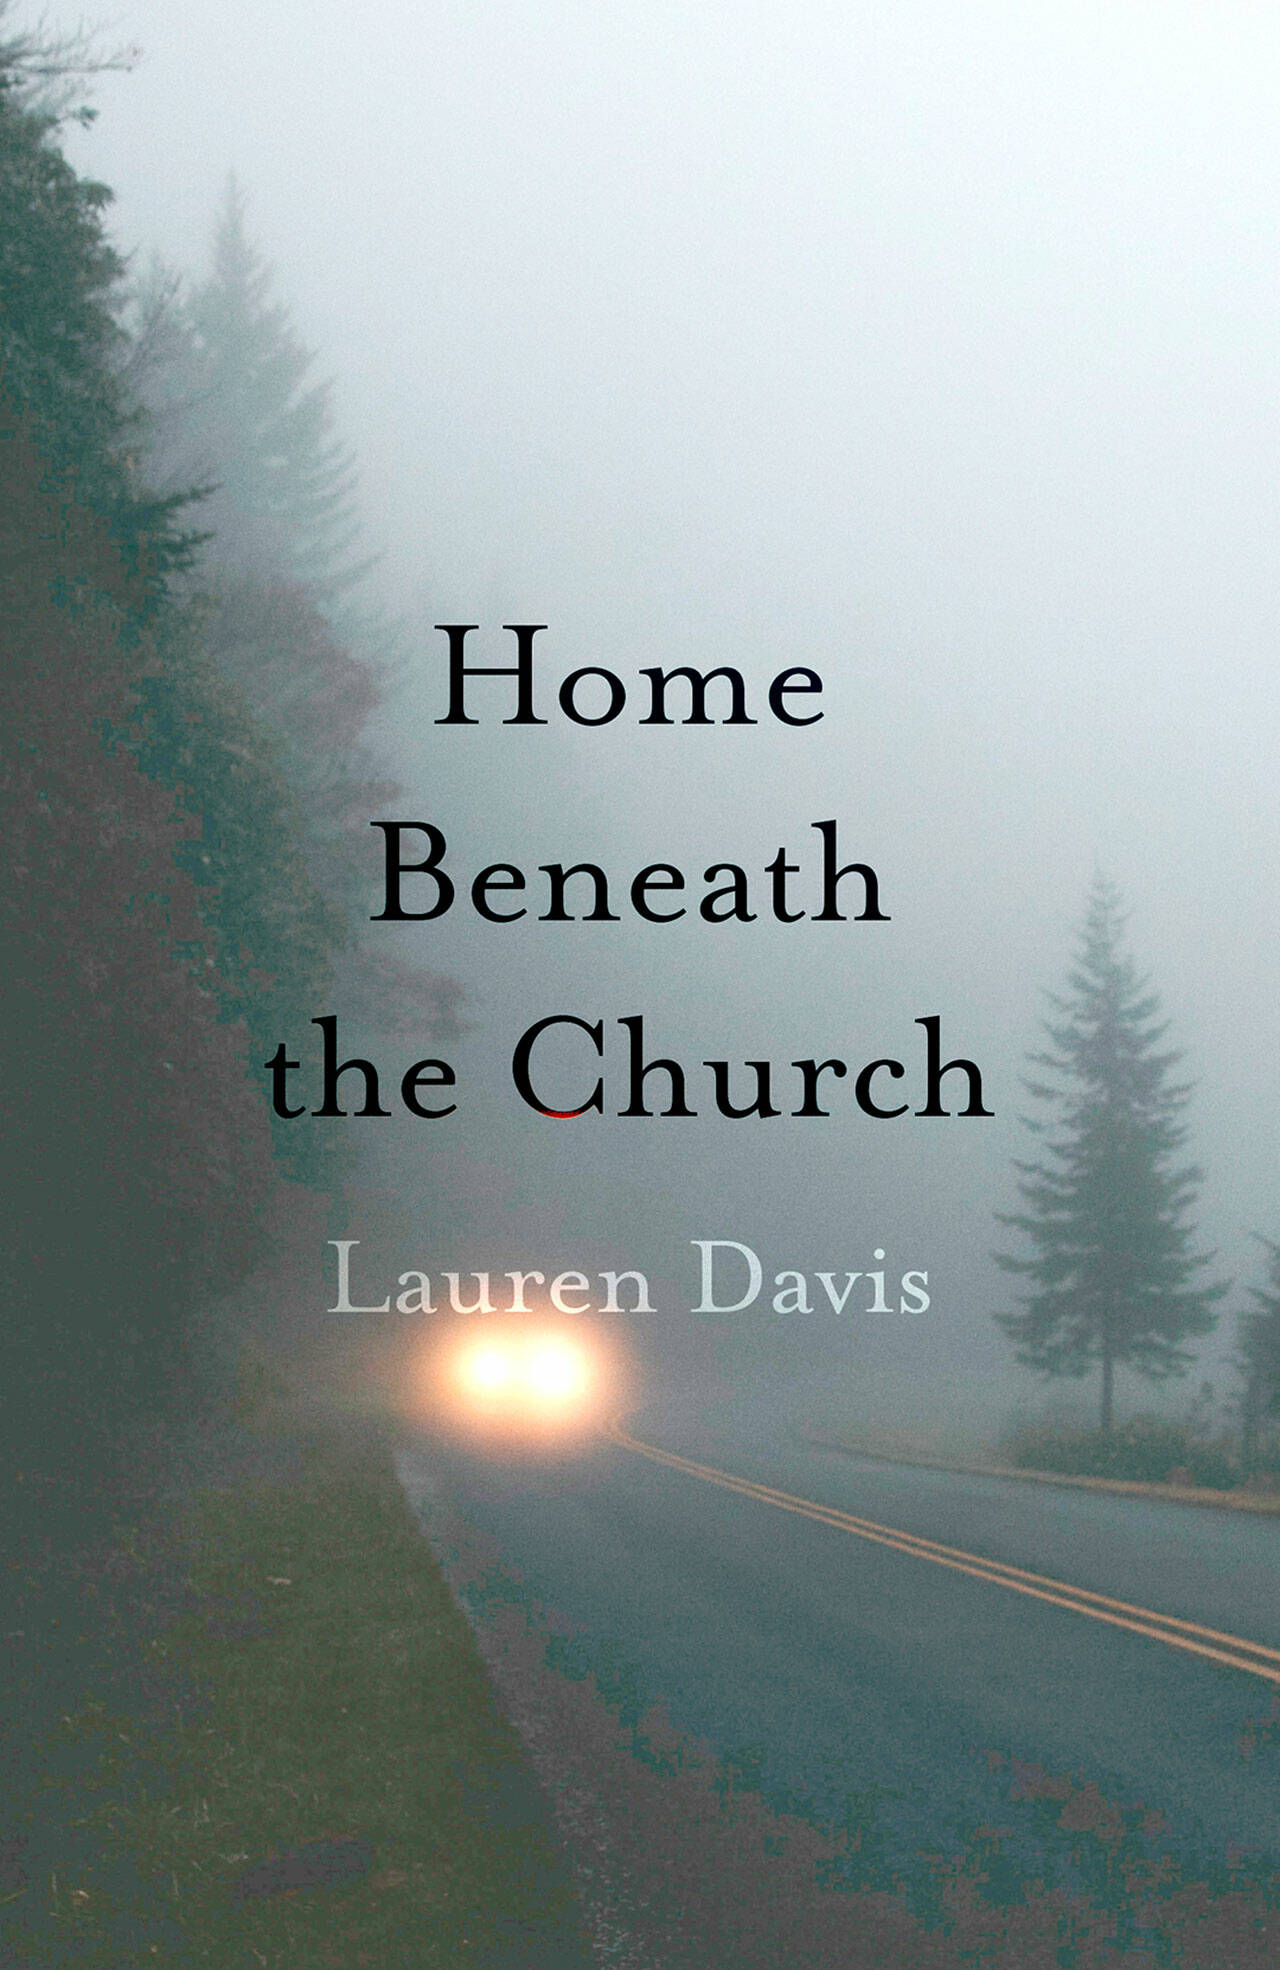 Lauren Davis’ new book is her first full-length poetry collection.